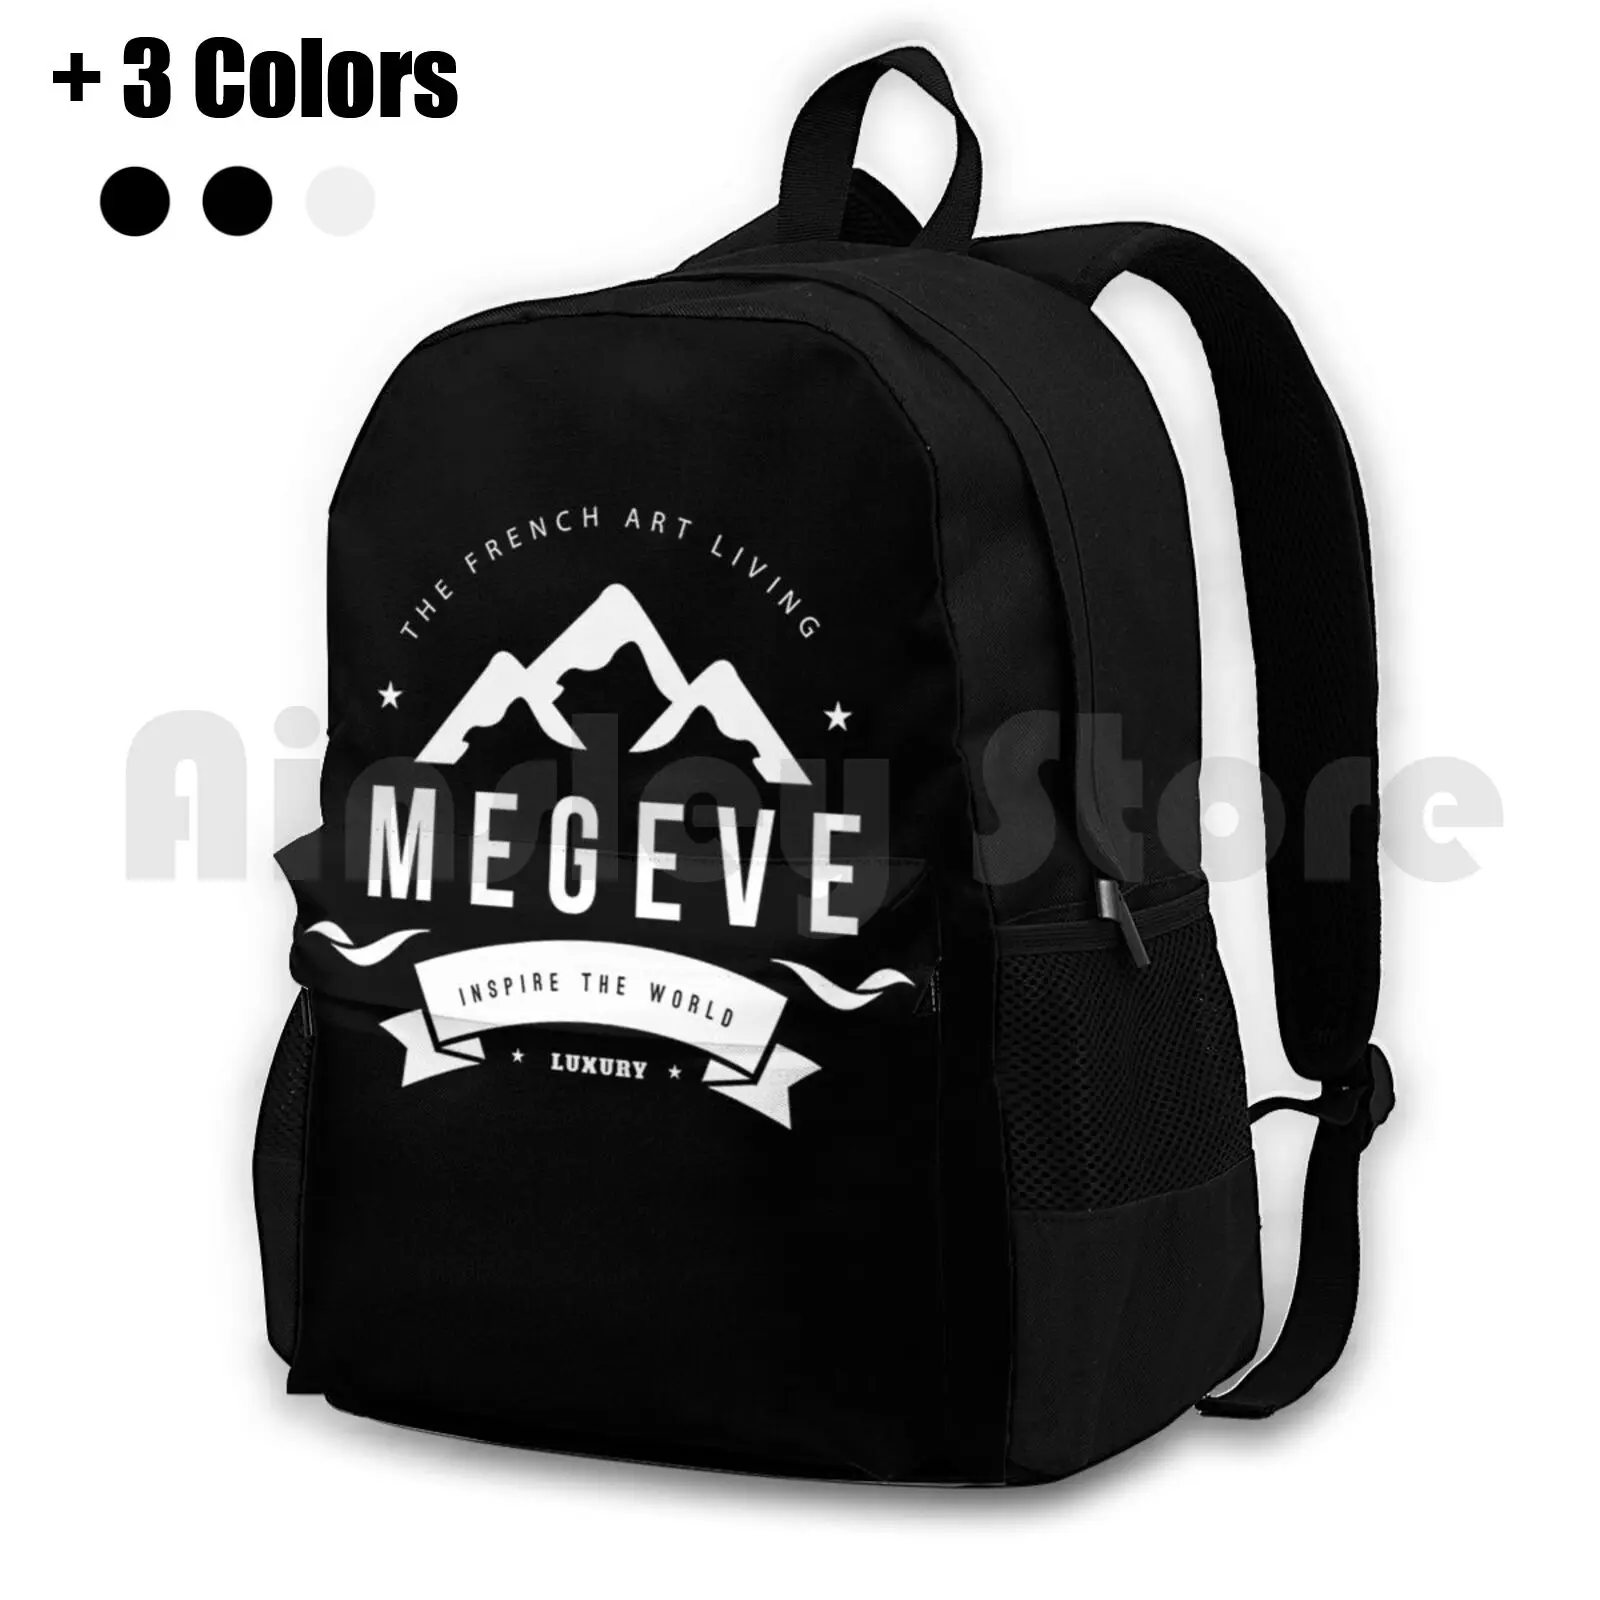 

Megeve Outdoor Hiking Backpack Waterproof Camping Travel Skiing Text French Cross Country France Ideas For Lifestyle Ski Resort